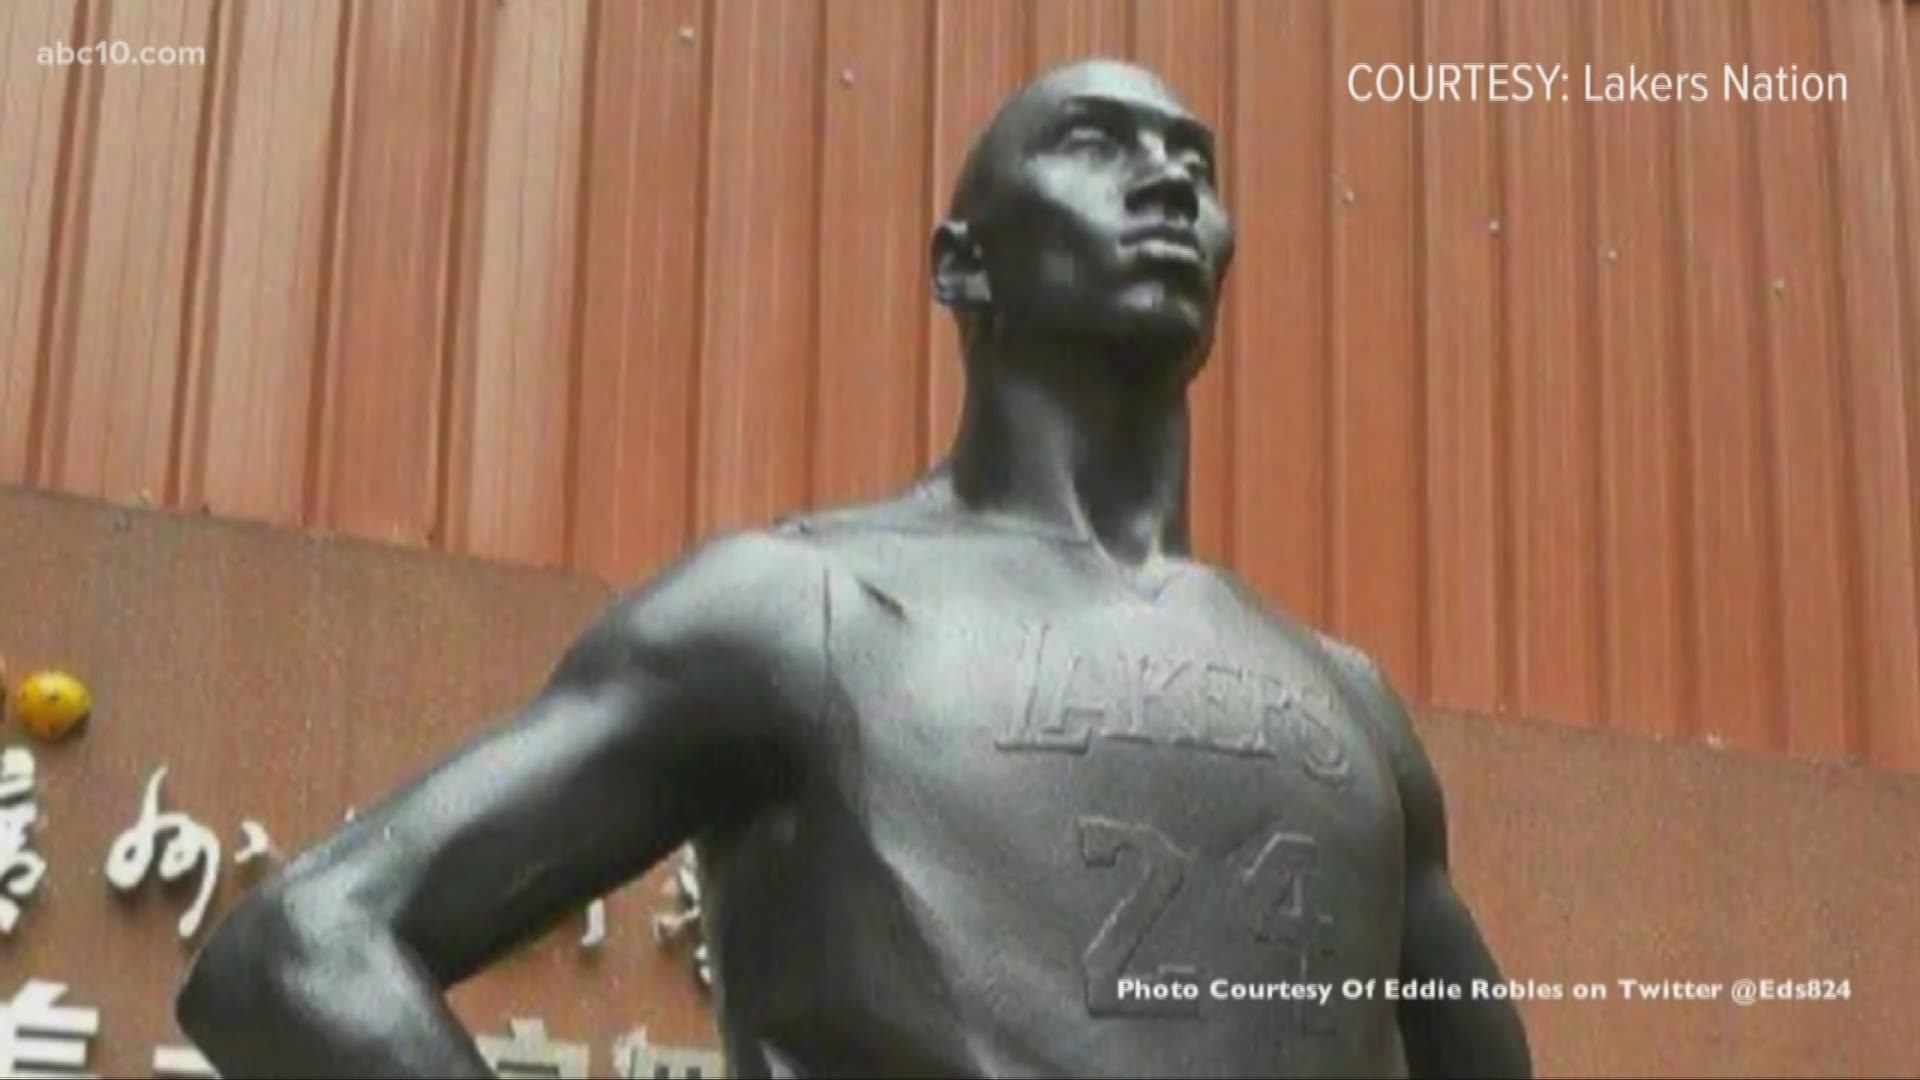 Following the tragic passing of NBA legend Kobe Bryant, fans in Los Angeles are calling for a statue honoring the Laker great. And they want it sooner than later.